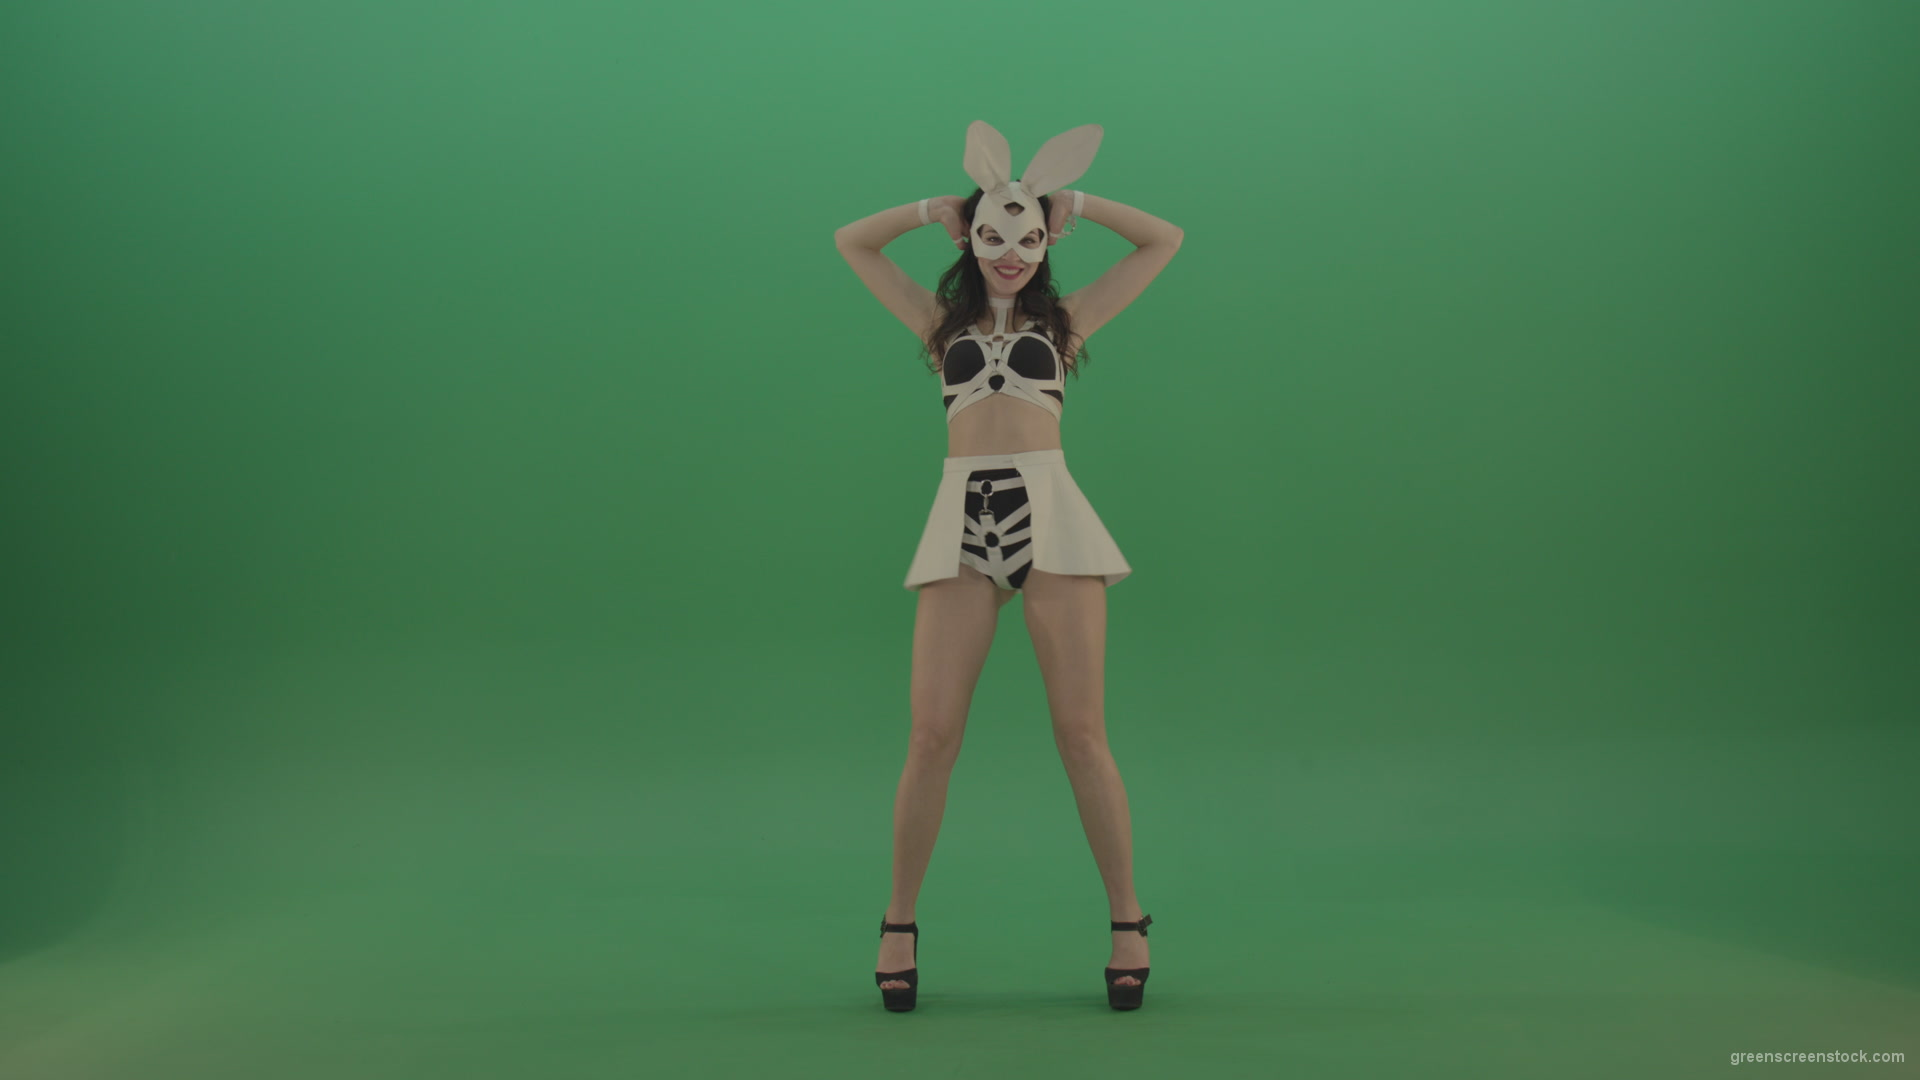 Black-white-sexy-costume-the-girl-moves-the-basin-in-different-directions-on-chromakey-background_007 Green Screen Stock